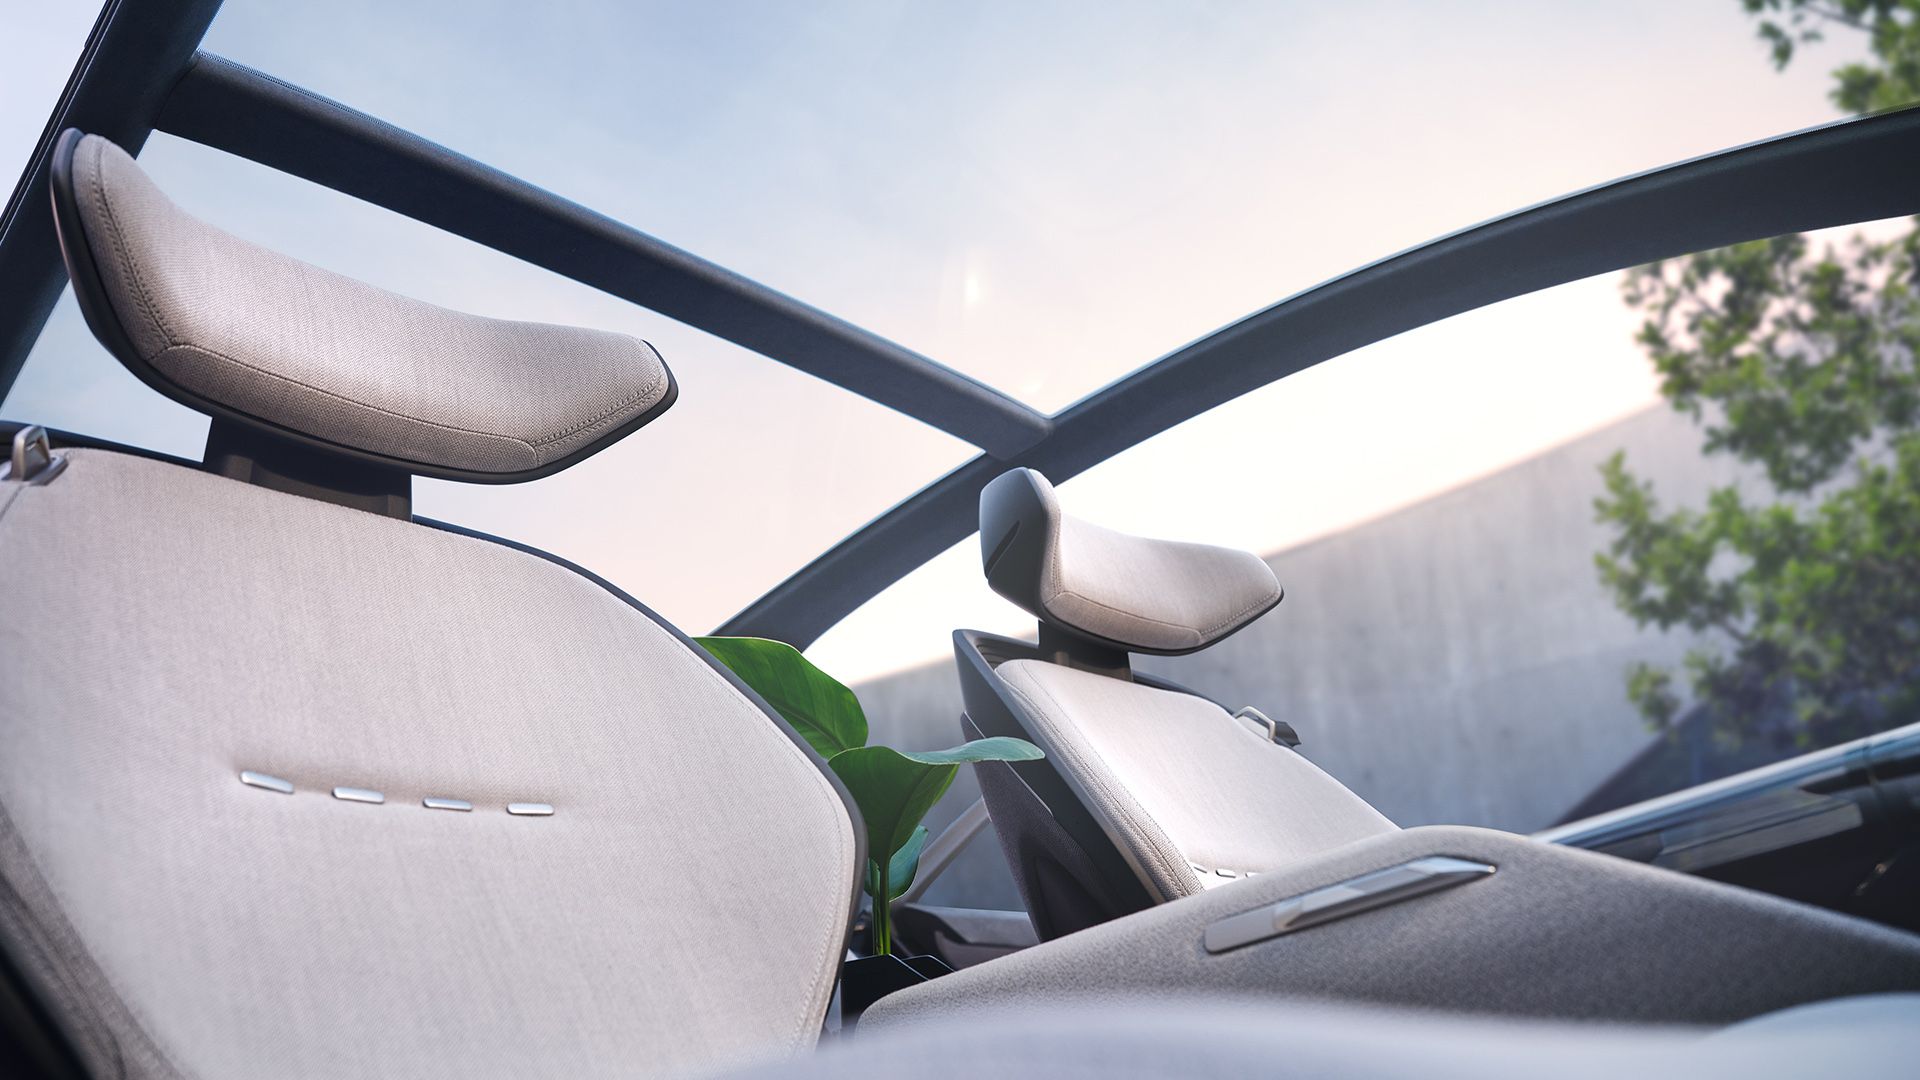 Interior view of the Audi grandsphere concept with a view out of the panoramic roof.